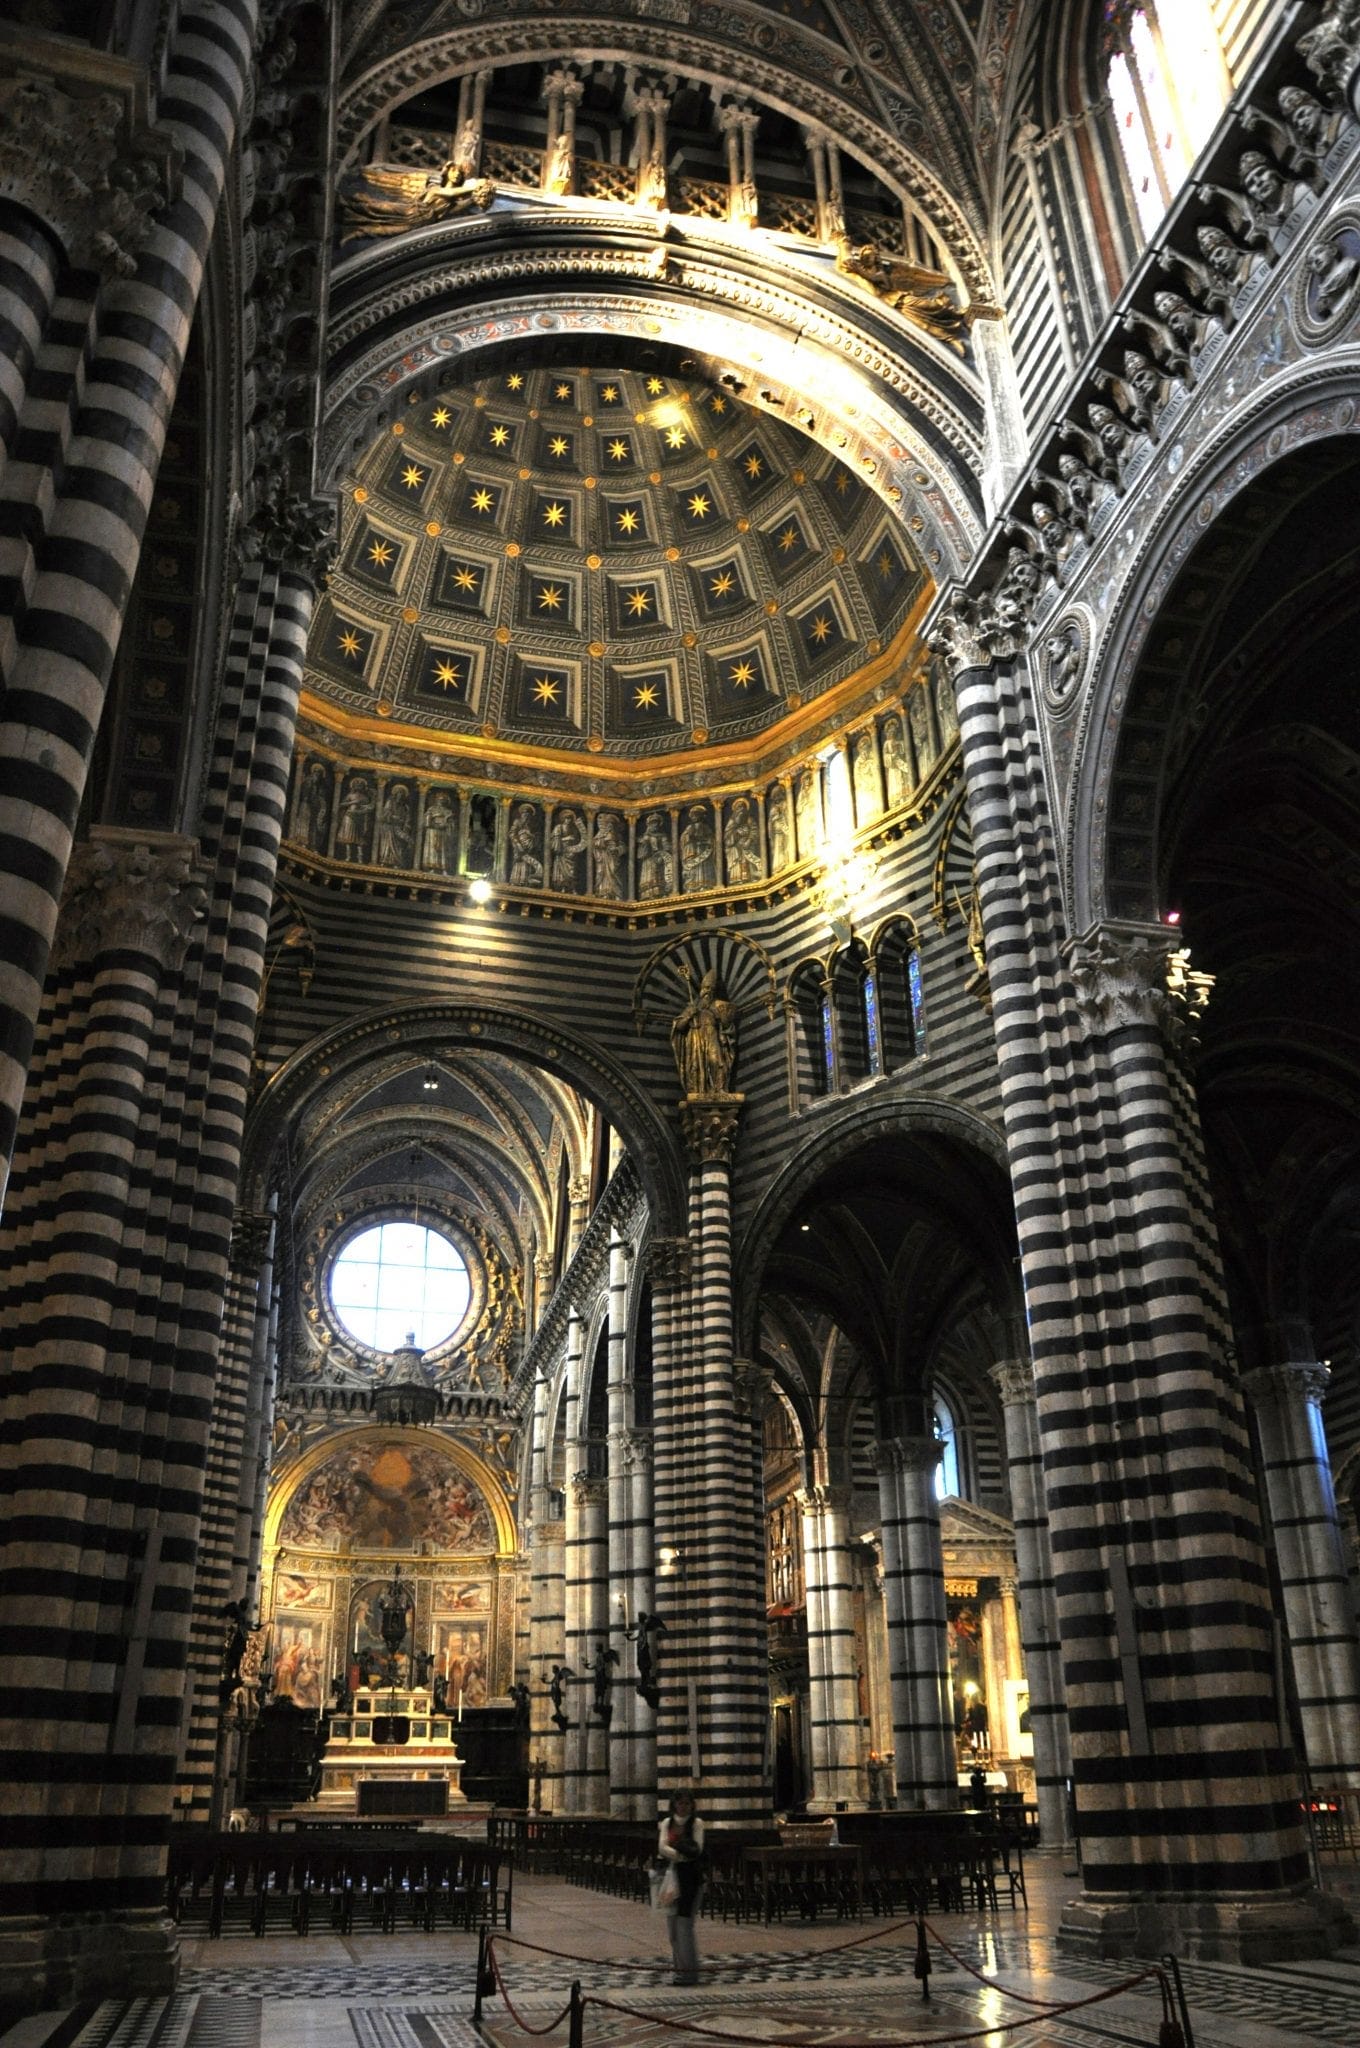 Main church of Siena, a Tuscan day trip from Florence